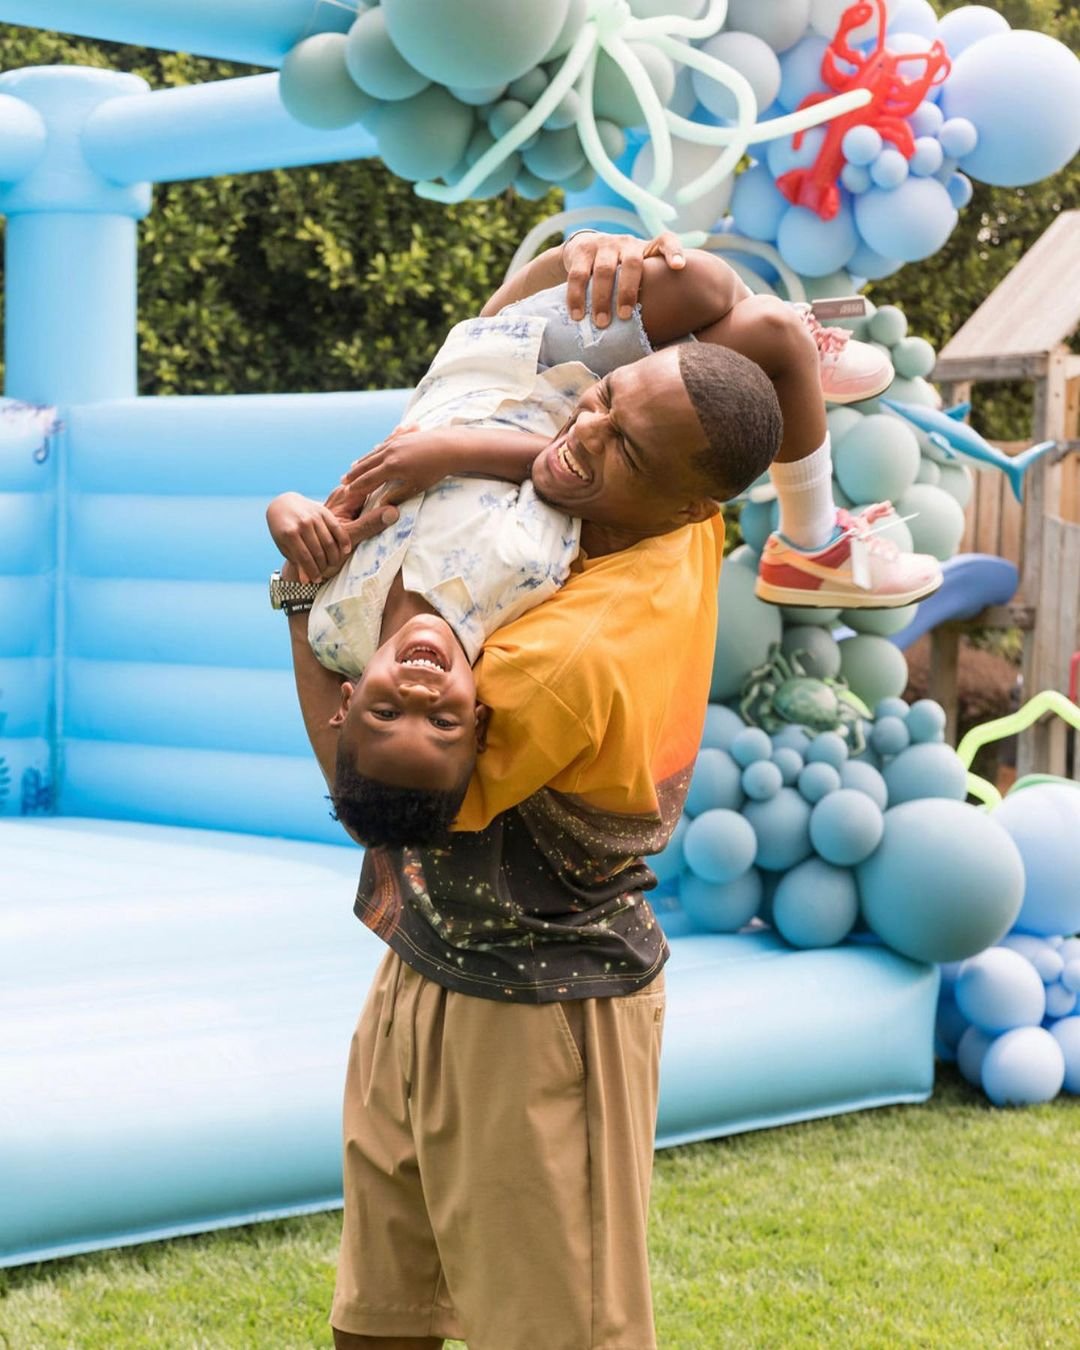 Russell Westbrook shares adorable photos from his son's 5th birthday party